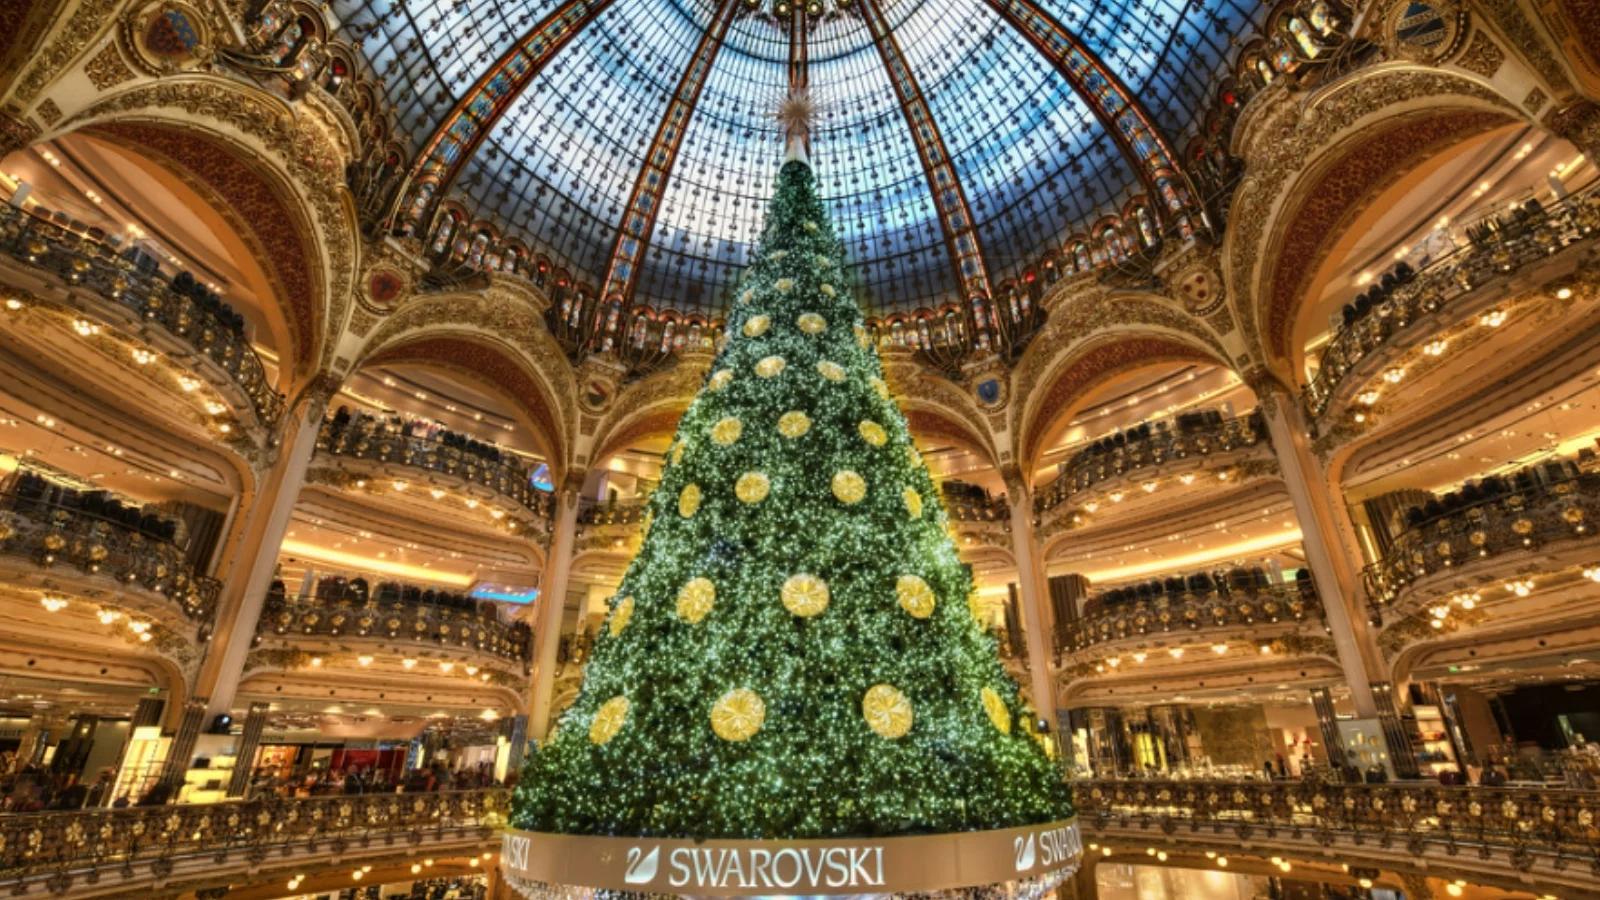 A huge Christmas tree with decorations.